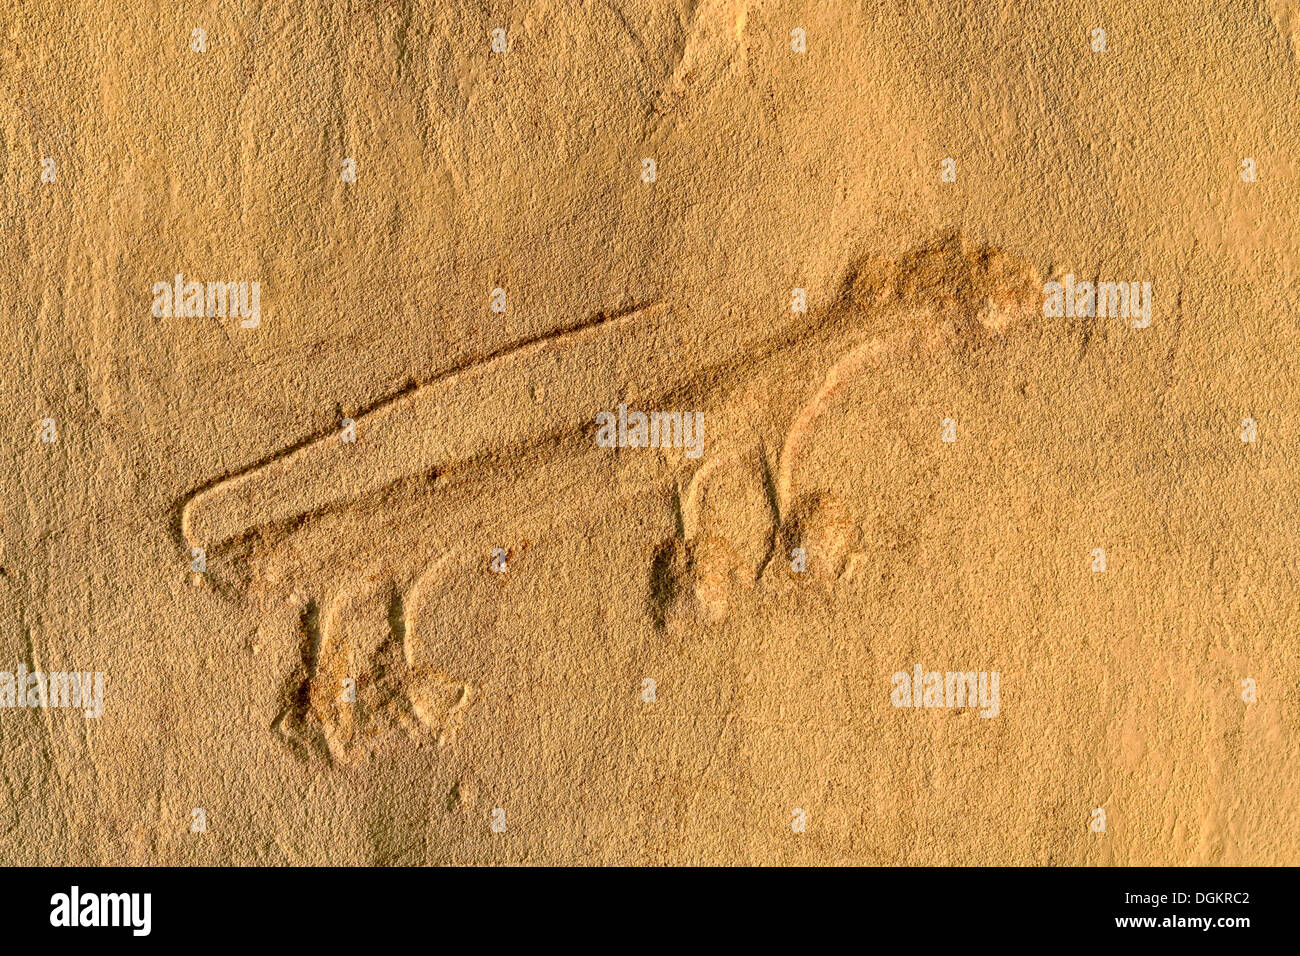 Representation of an animal, scratch drawing of the Anasazi in a cliff, Chaco Culture National Historical Park, Nagaezi Stock Photo